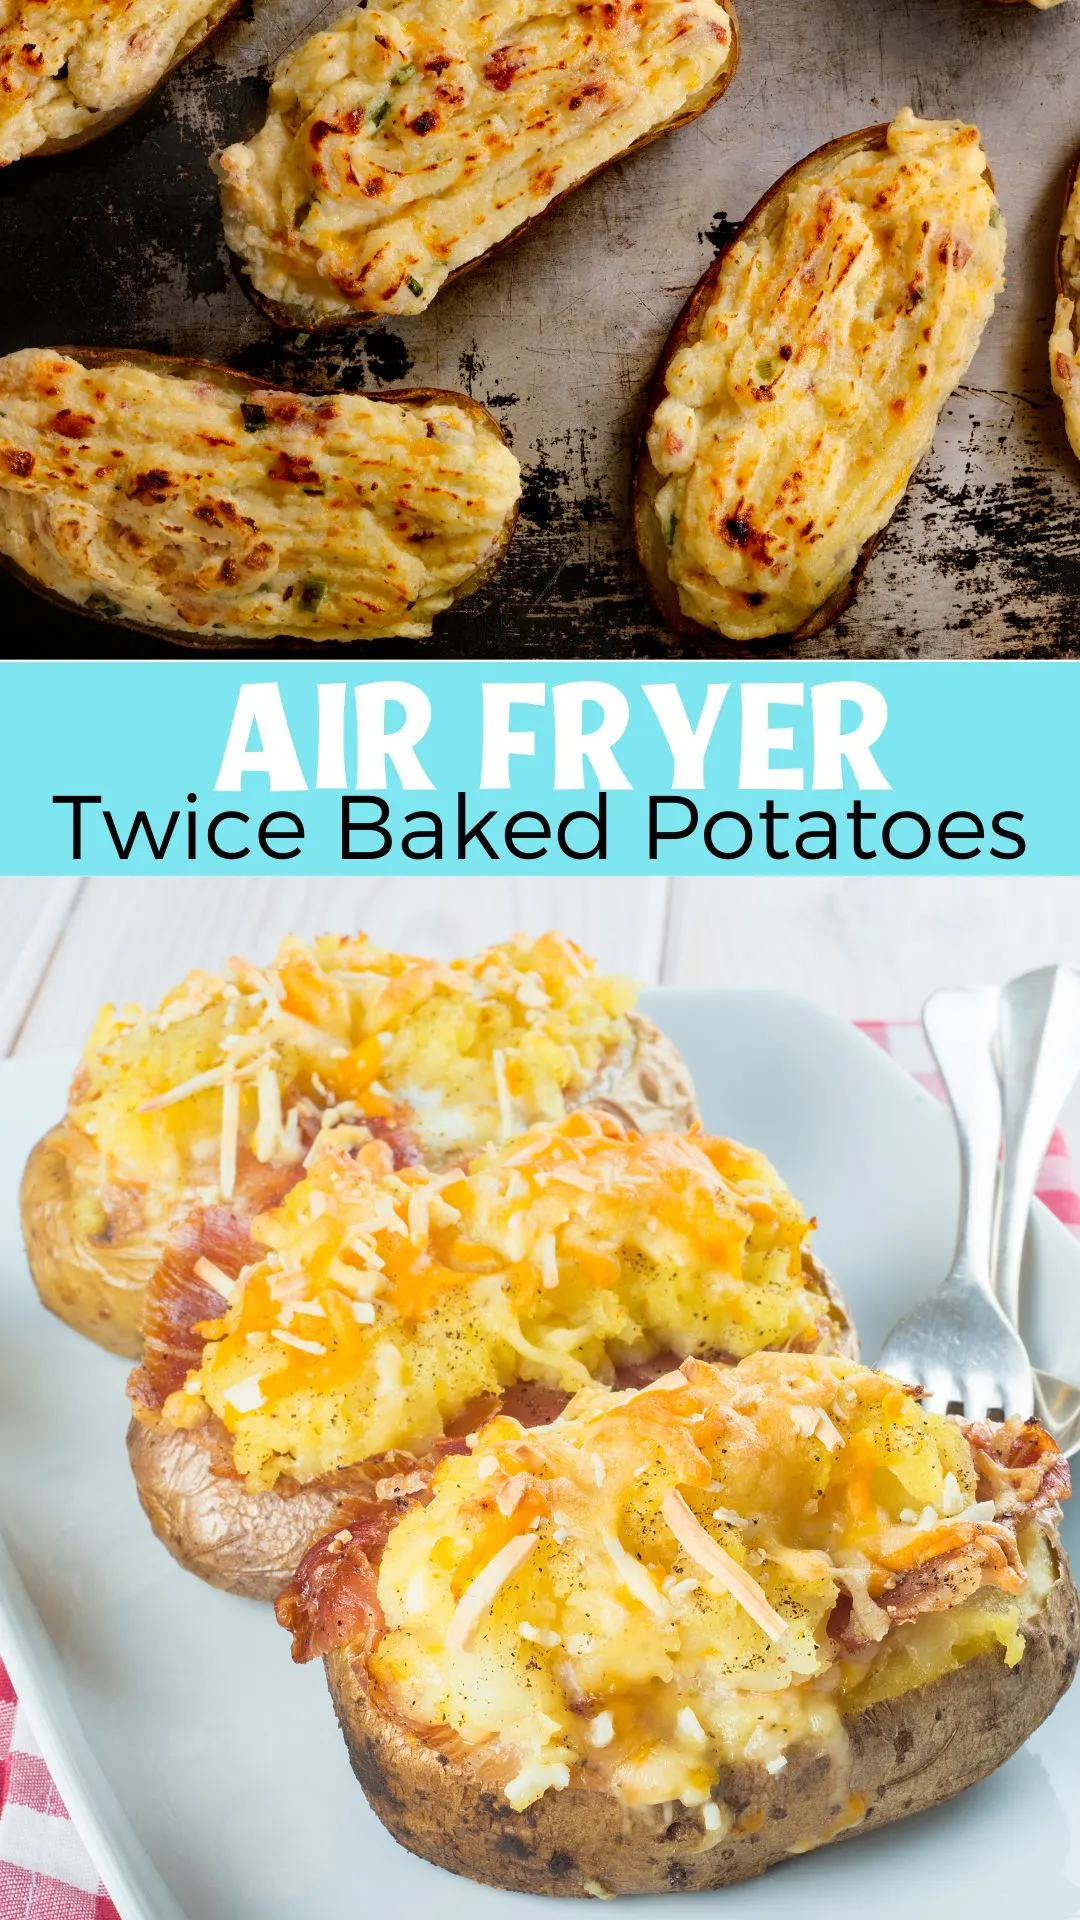 Twice baked potatoes in the air fryer